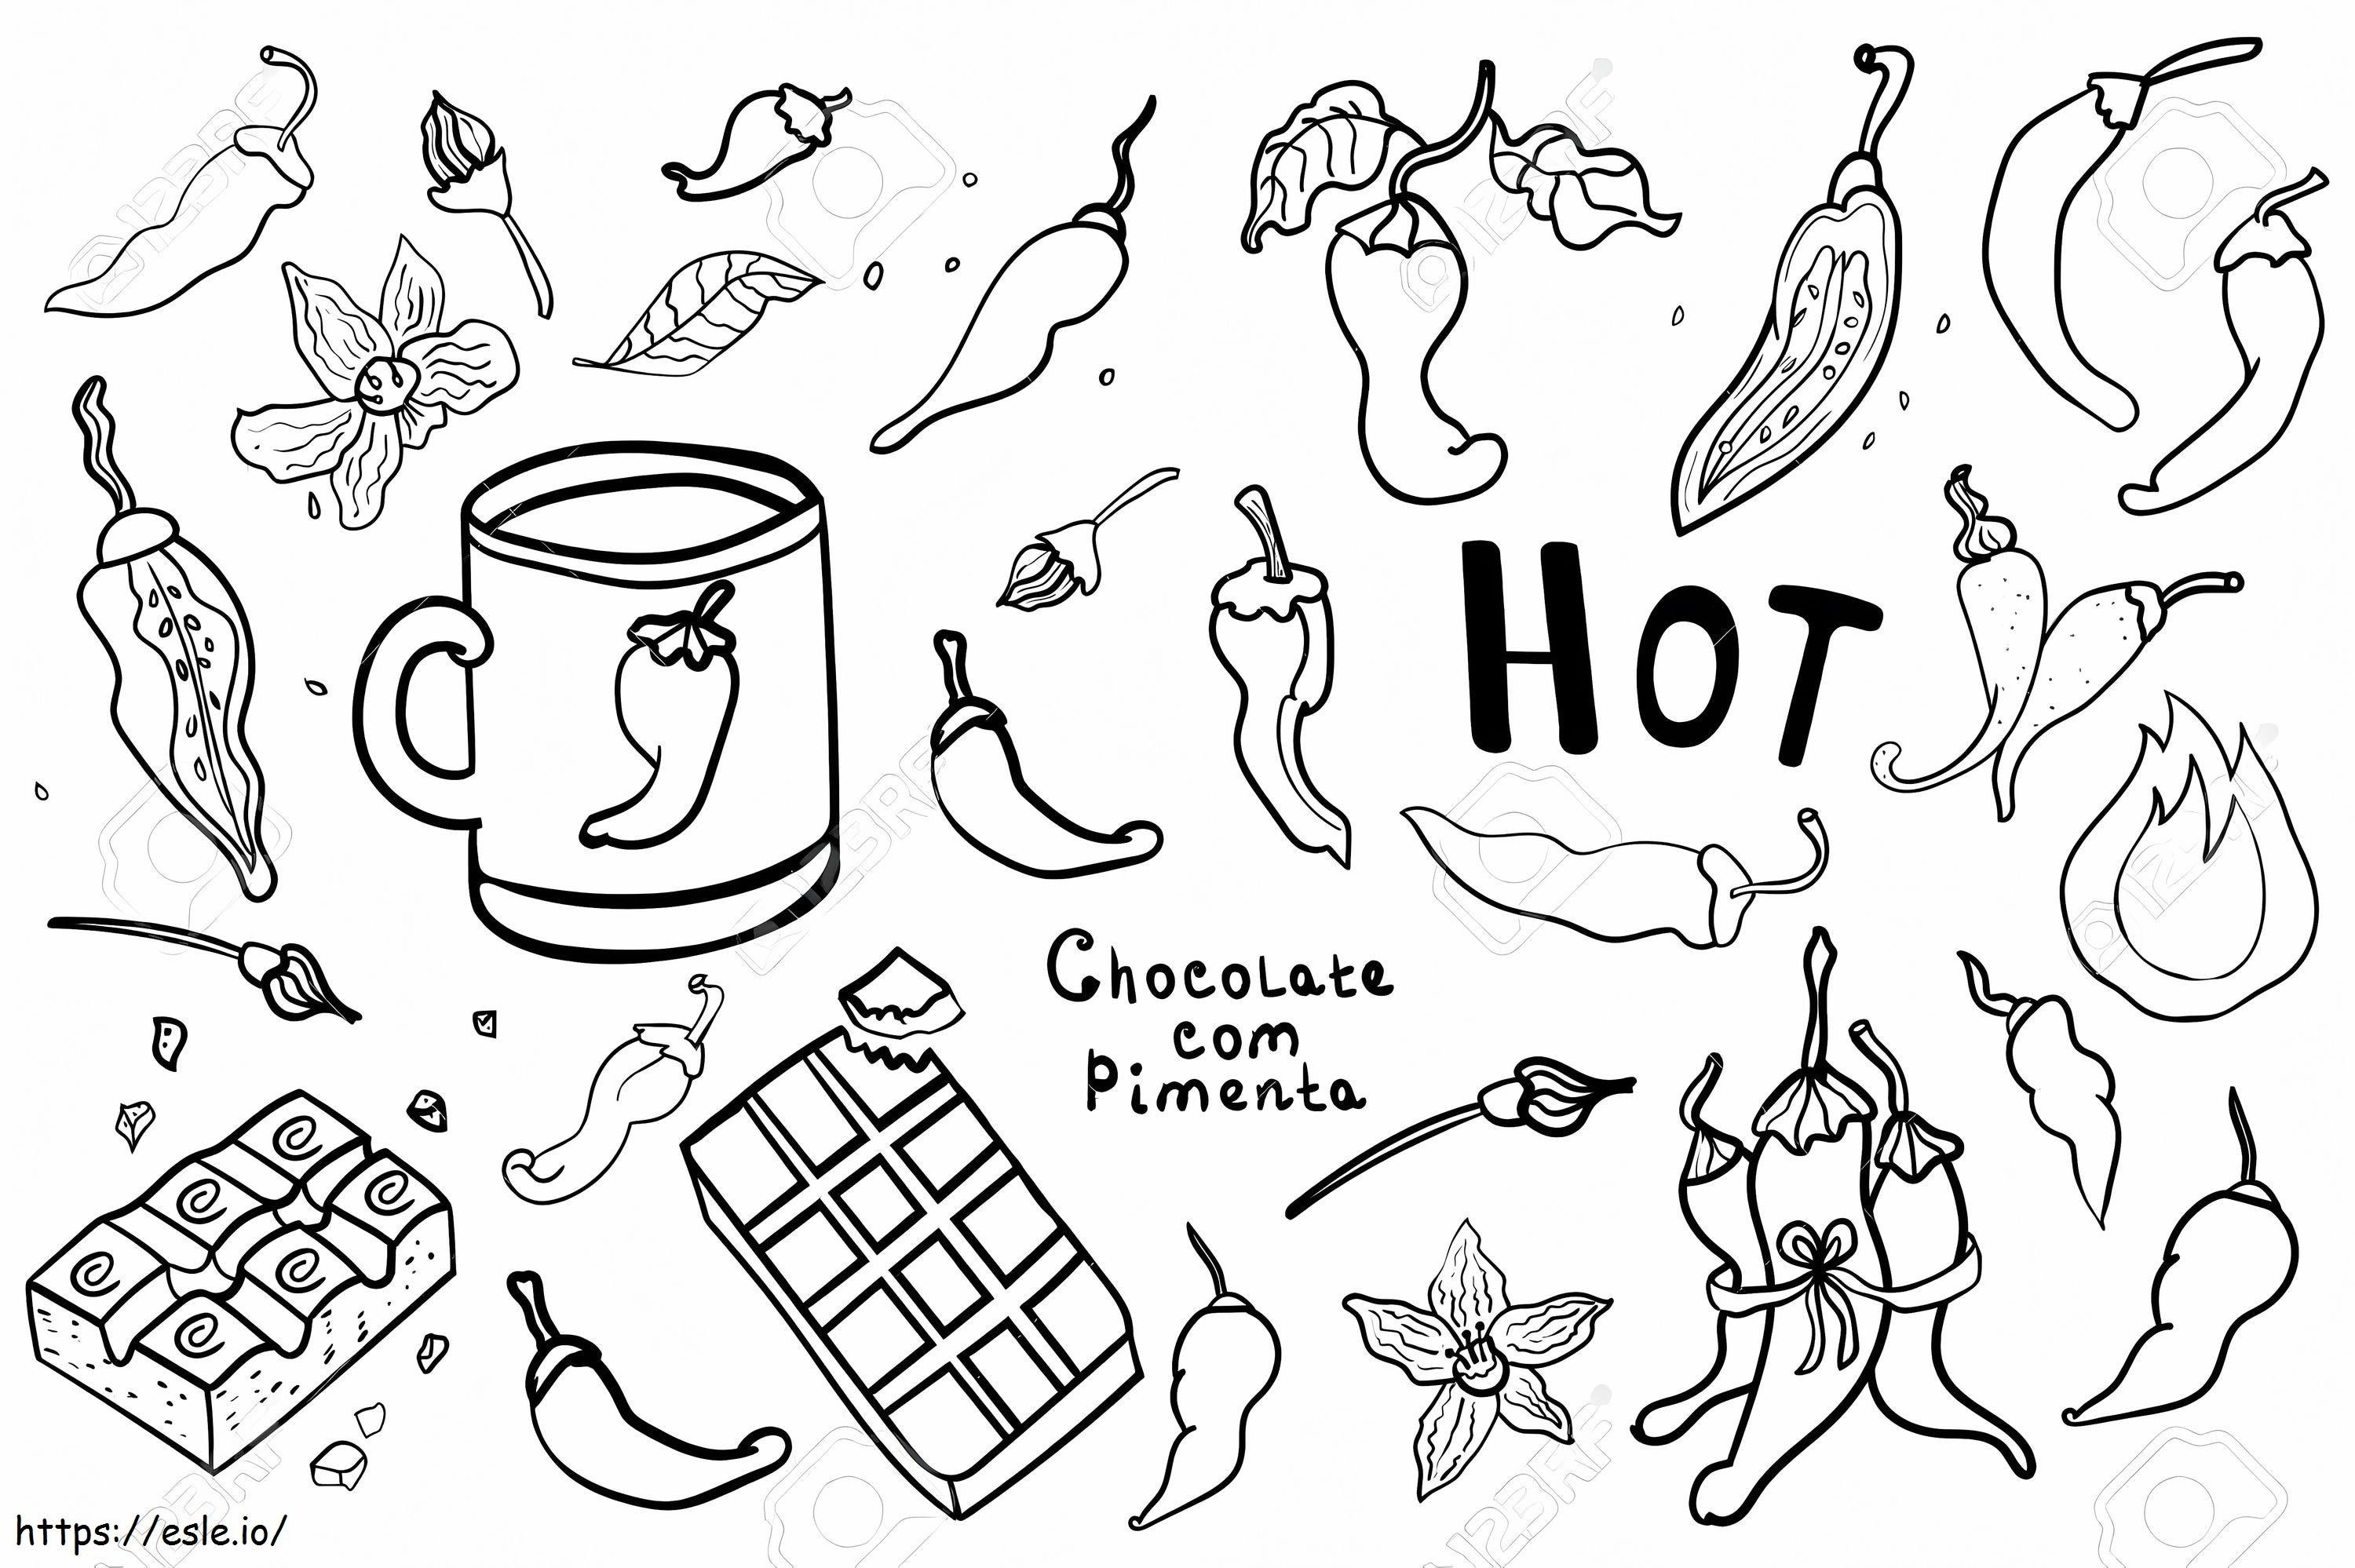 Good Chili coloring page